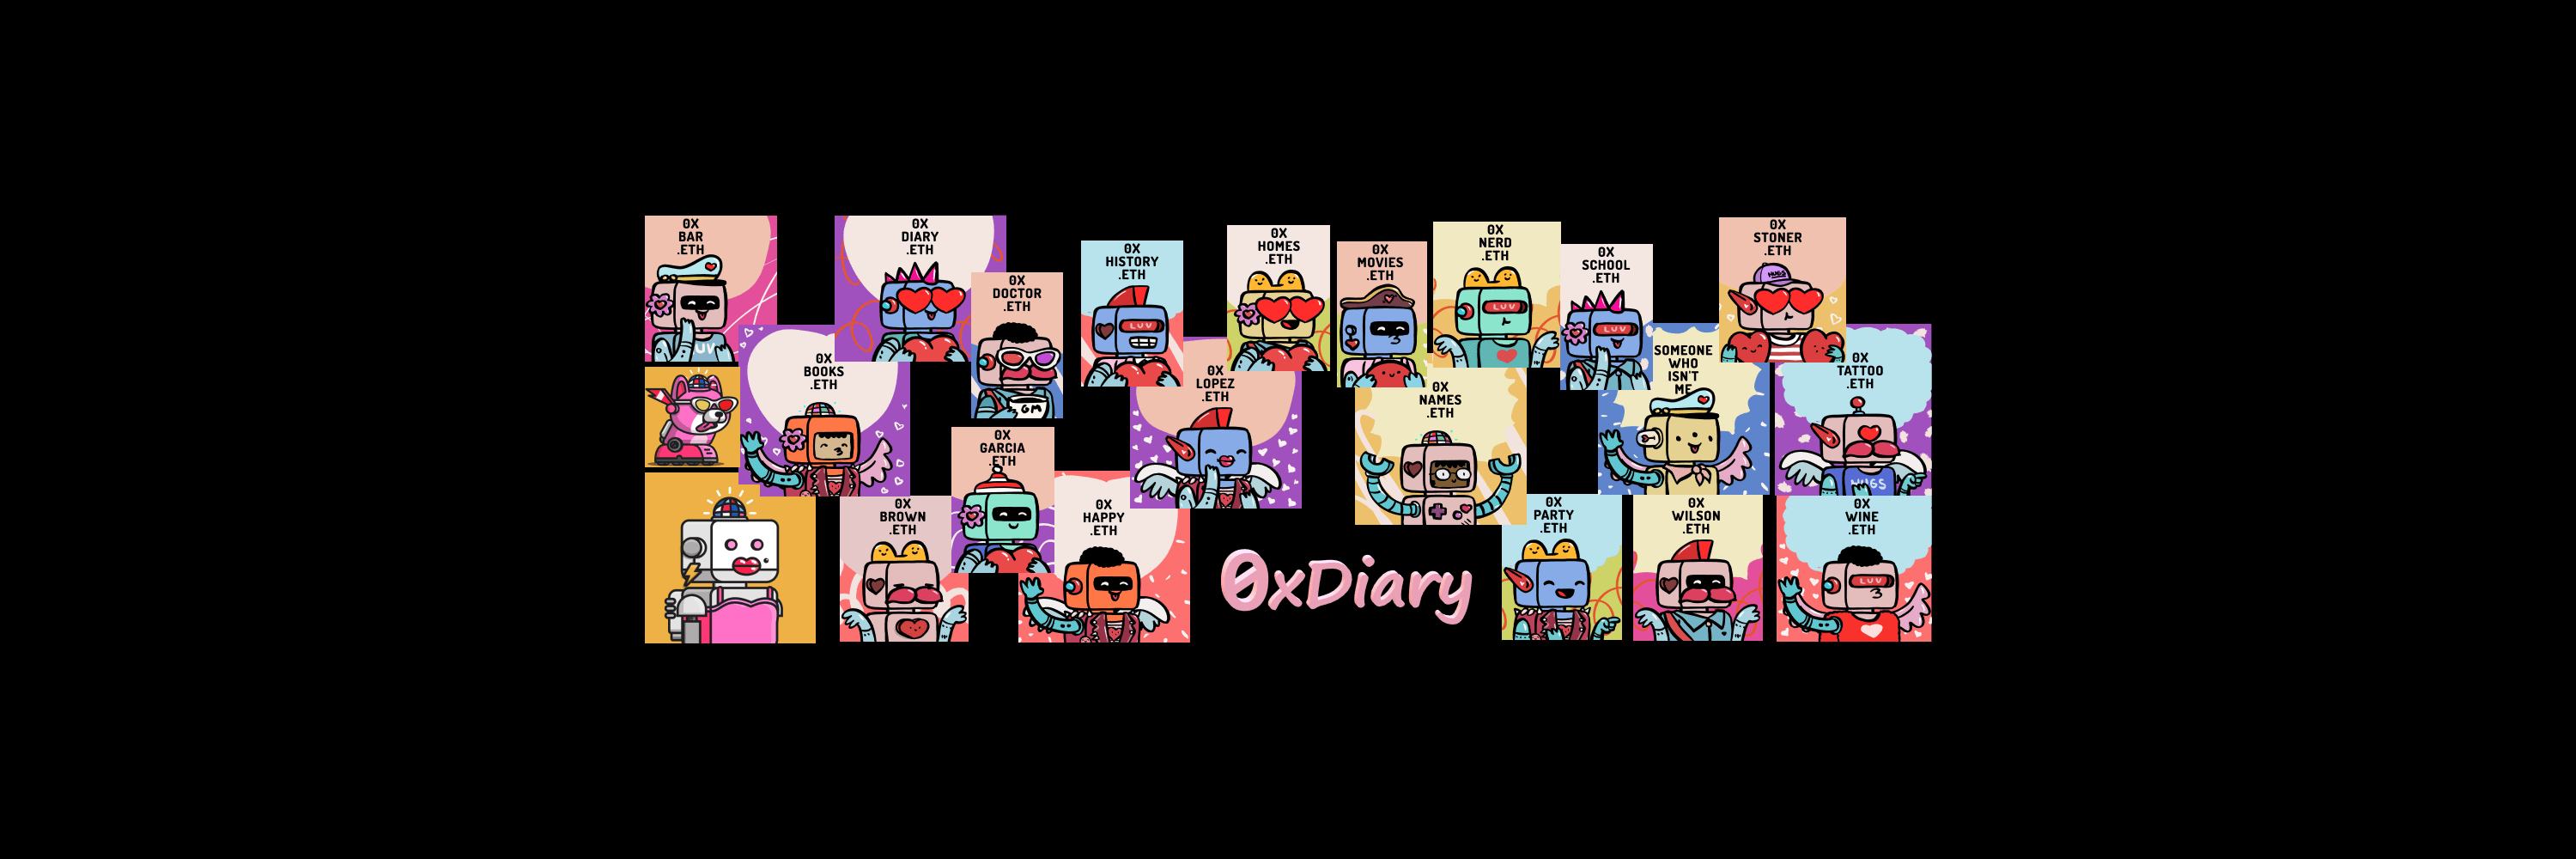 0xDoctor-Lobby3 banner